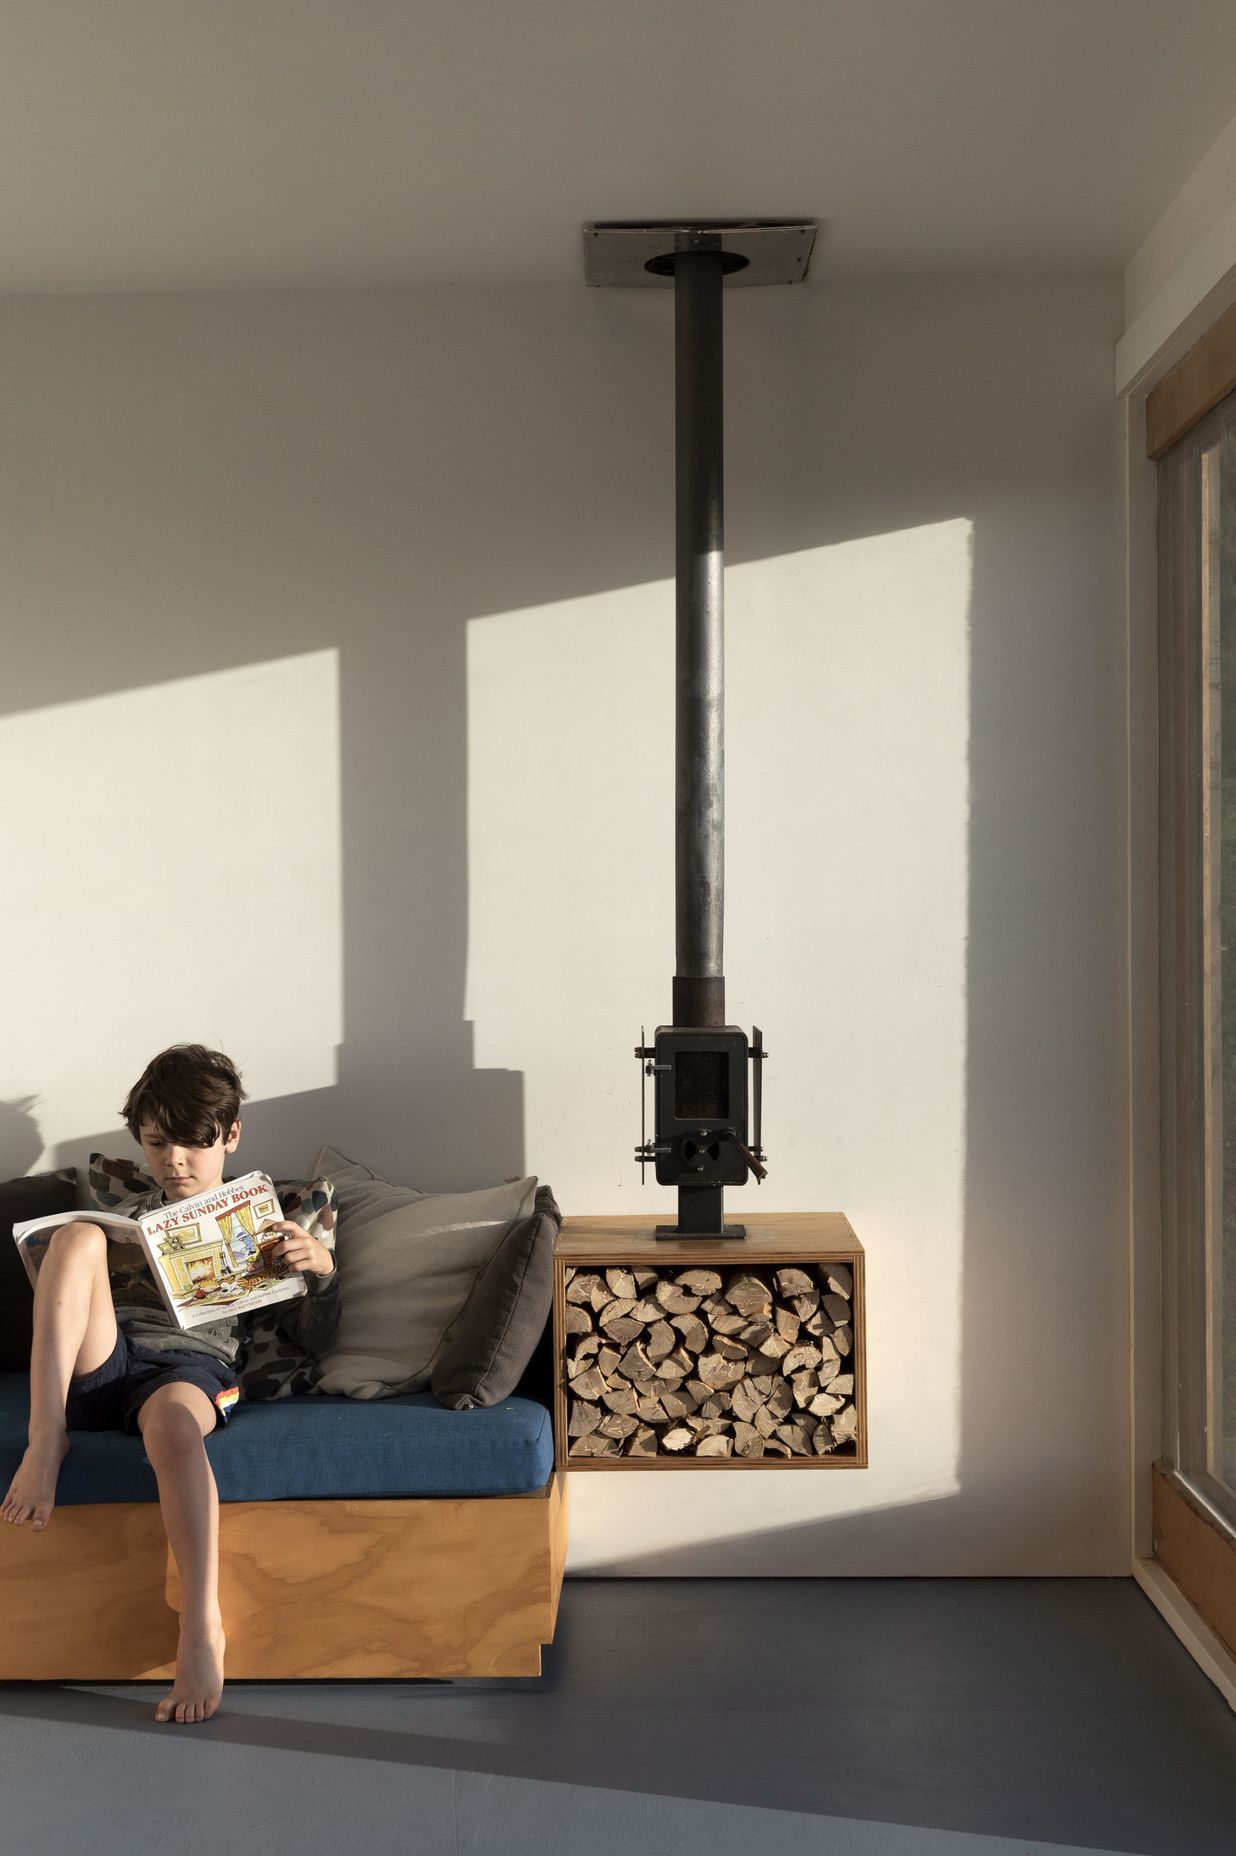 The owners's son enjoying some reading on the bespoke sofa, which features an adjacent fireplace and wood storage.